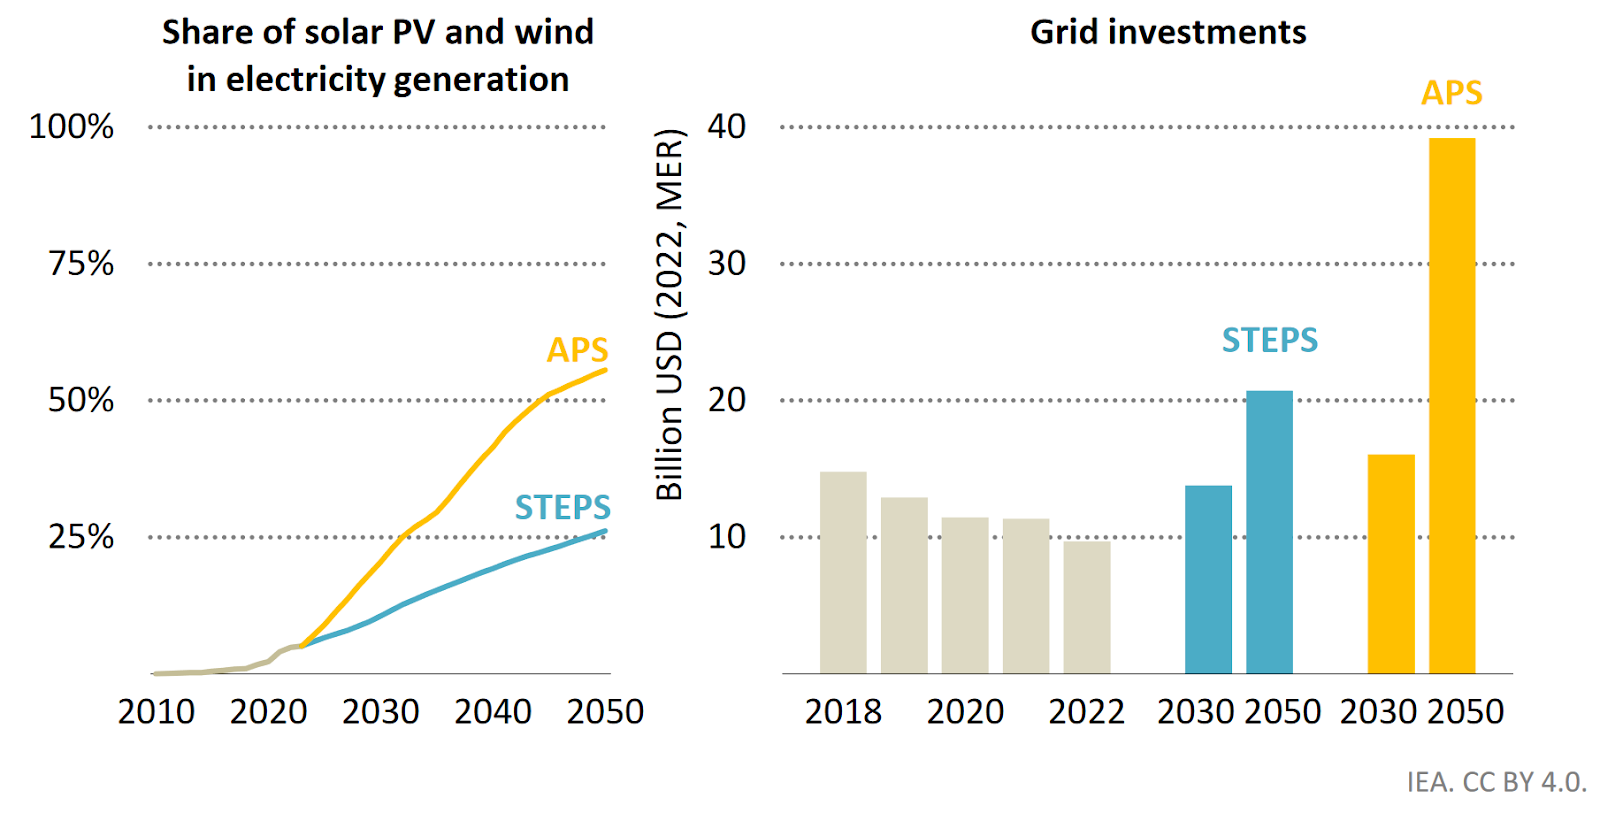 Wind and Solar PV in Total Electricity Generation and Grid Investment in Southeast Asia by Scenario, Source: IEA